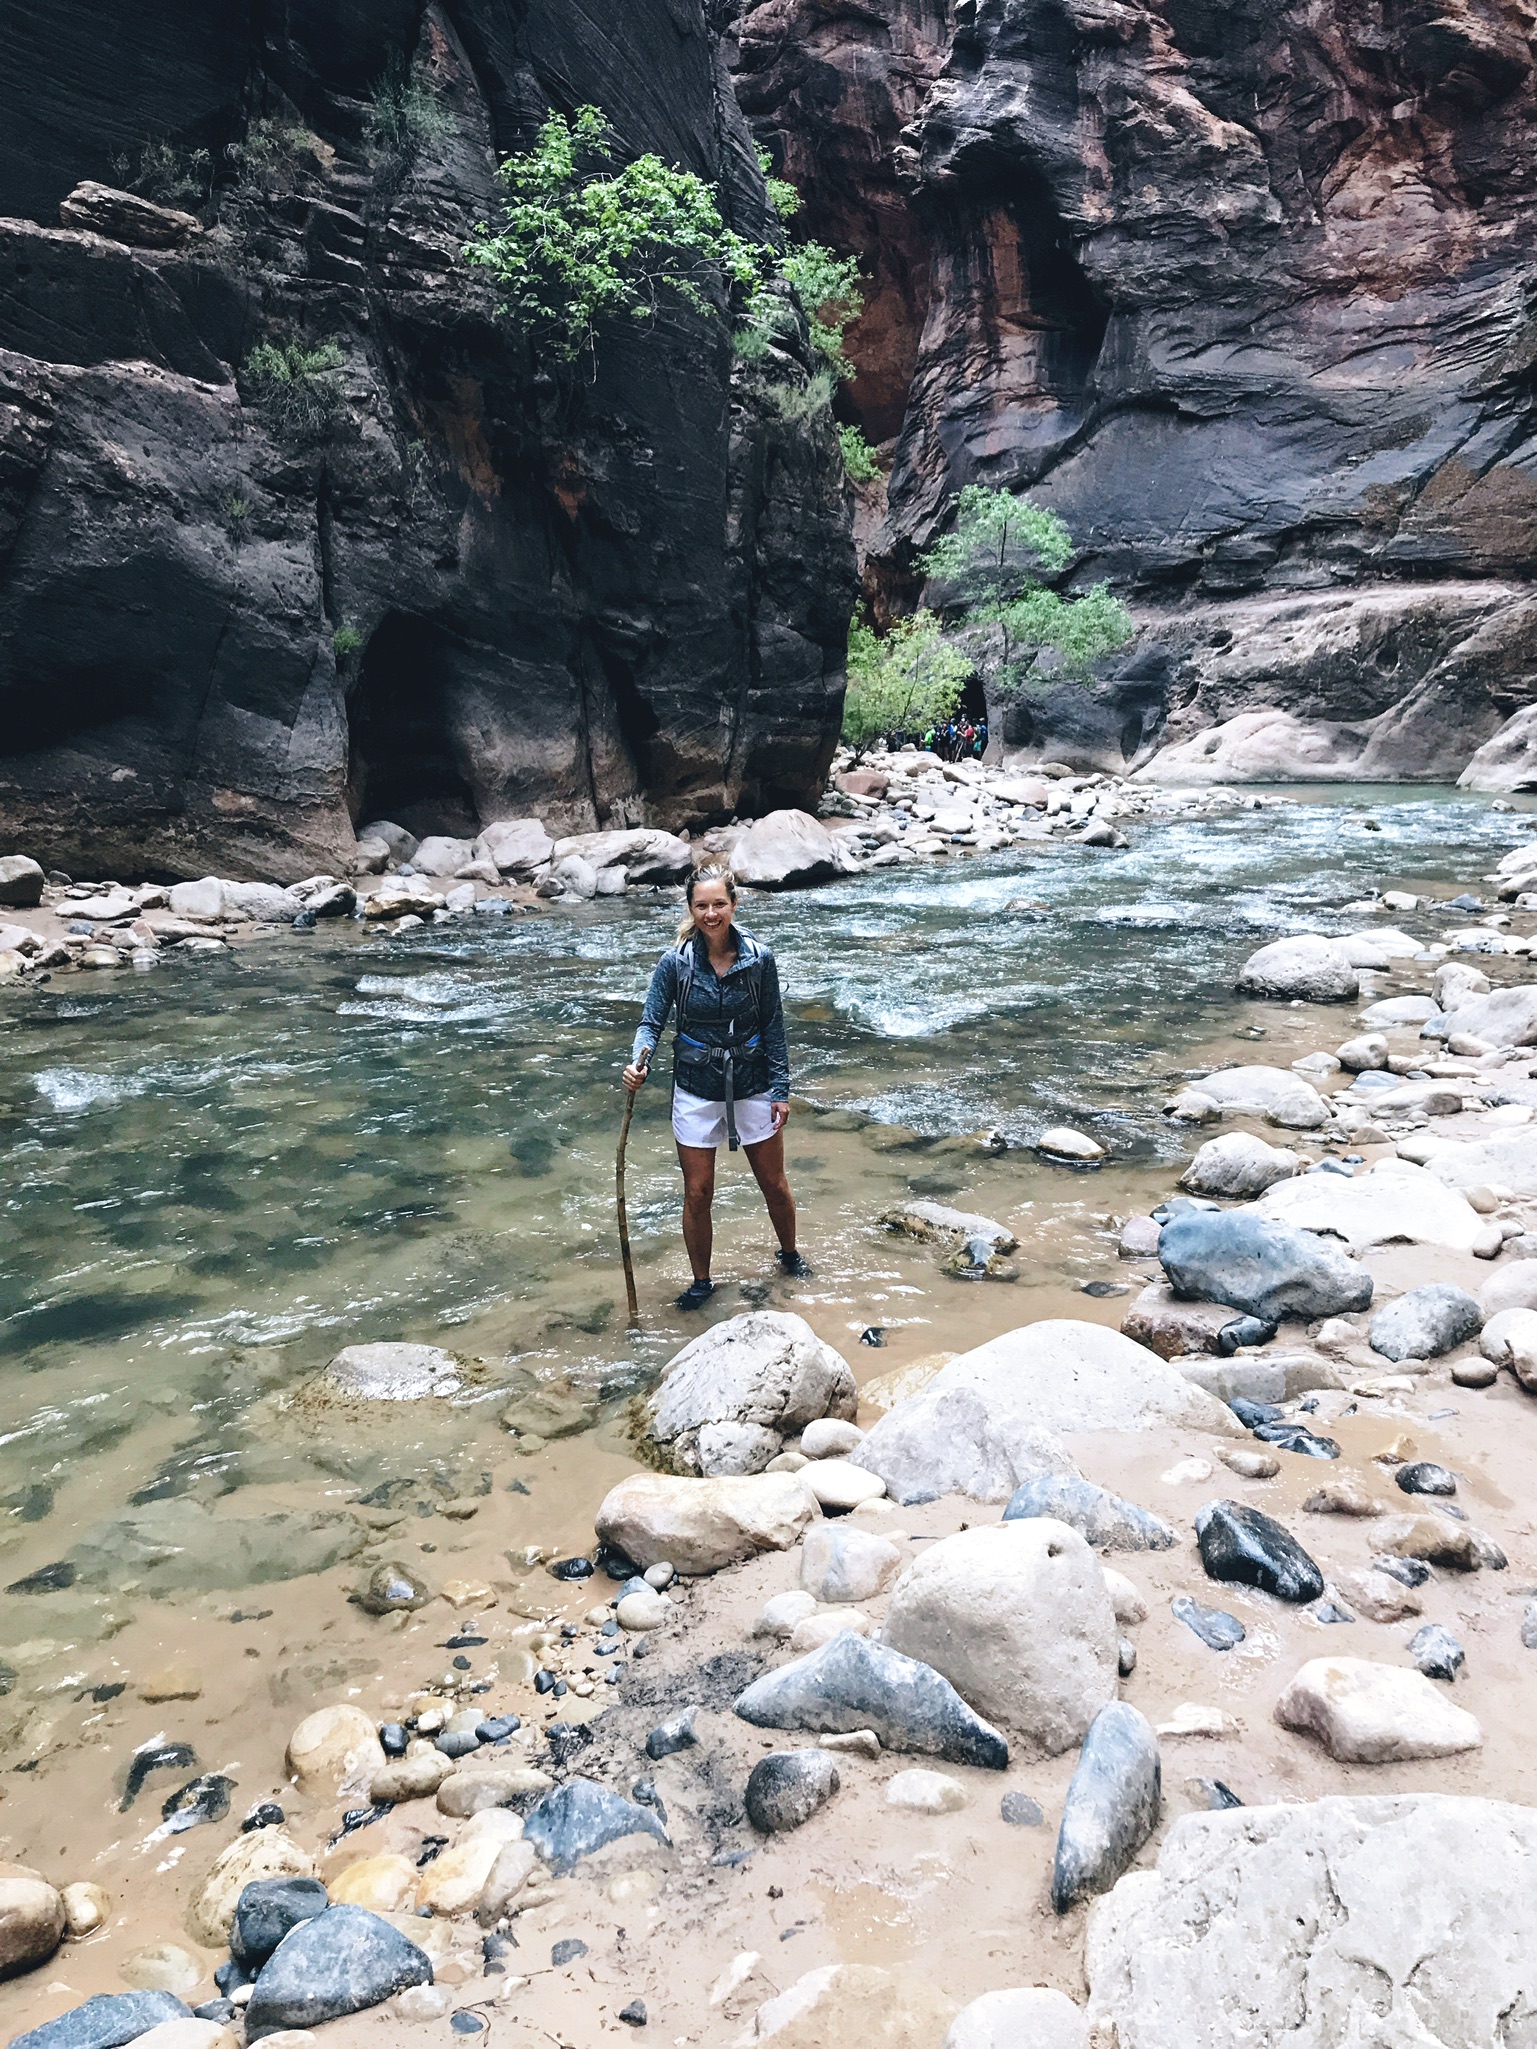 A hiking stick is a necessity in the Narrows